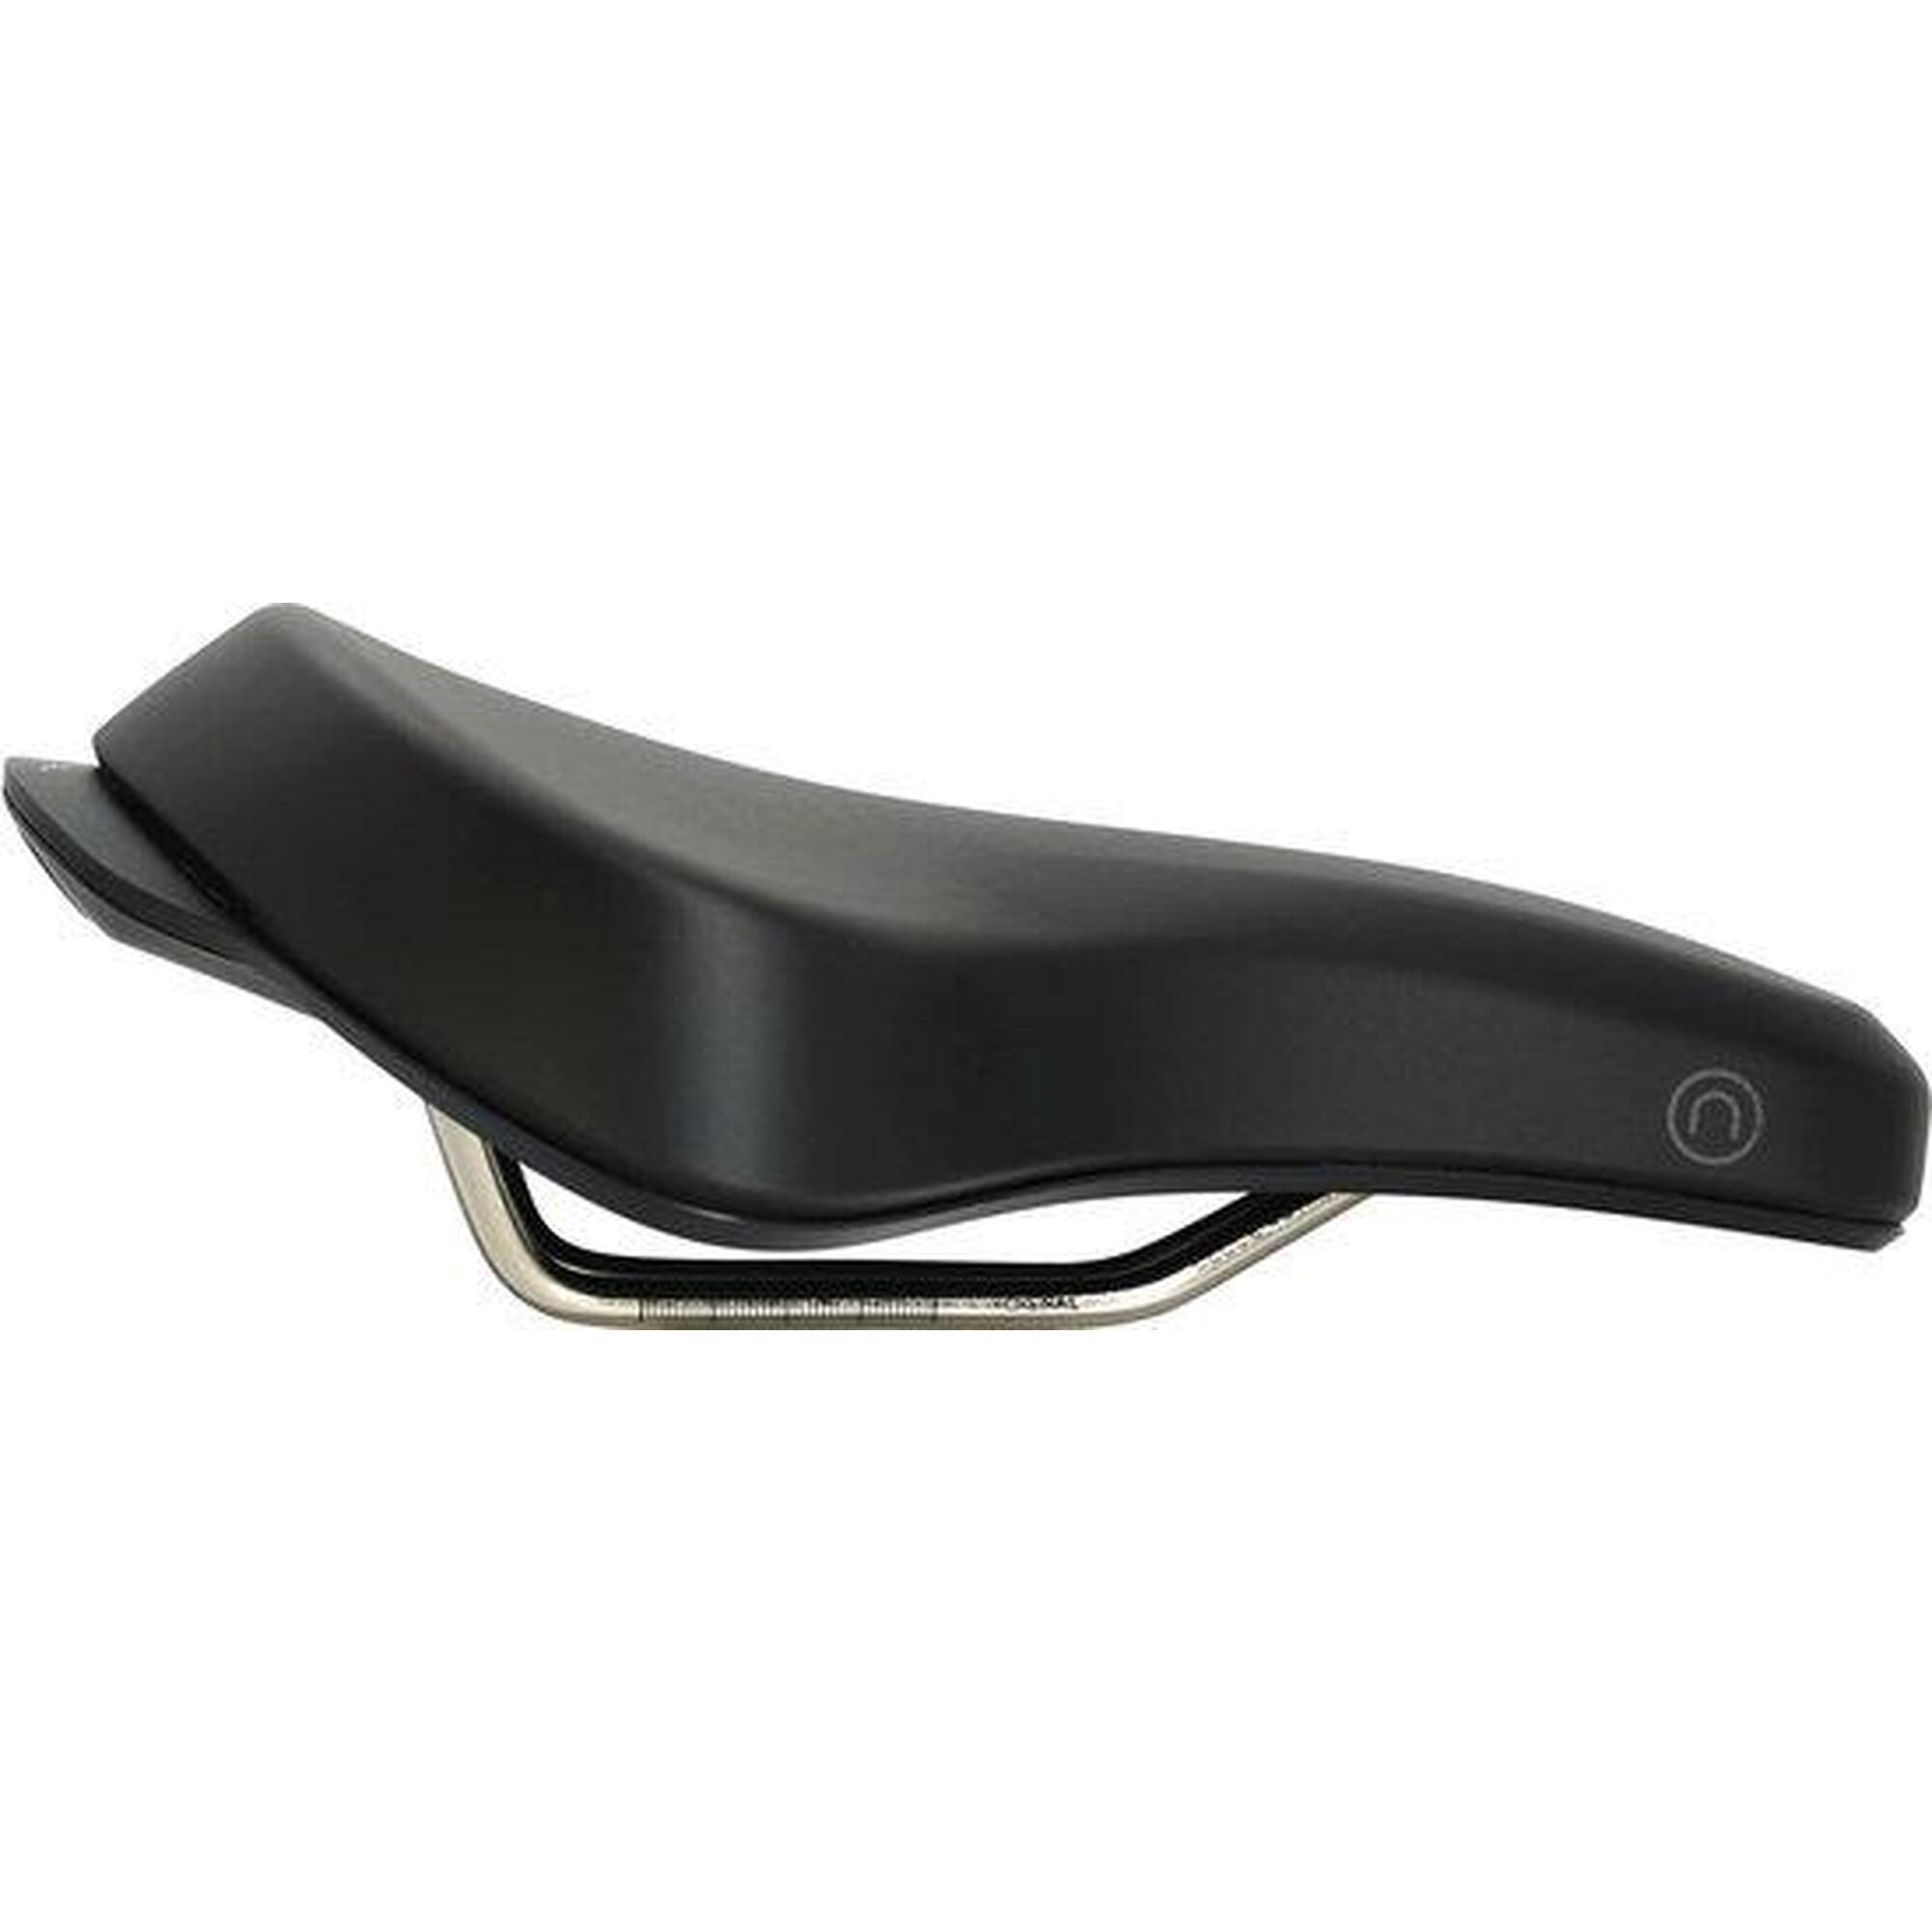 SELLE ROYAL Sella da bicicletta On, unisex Relaxed , 269 x 224 mm